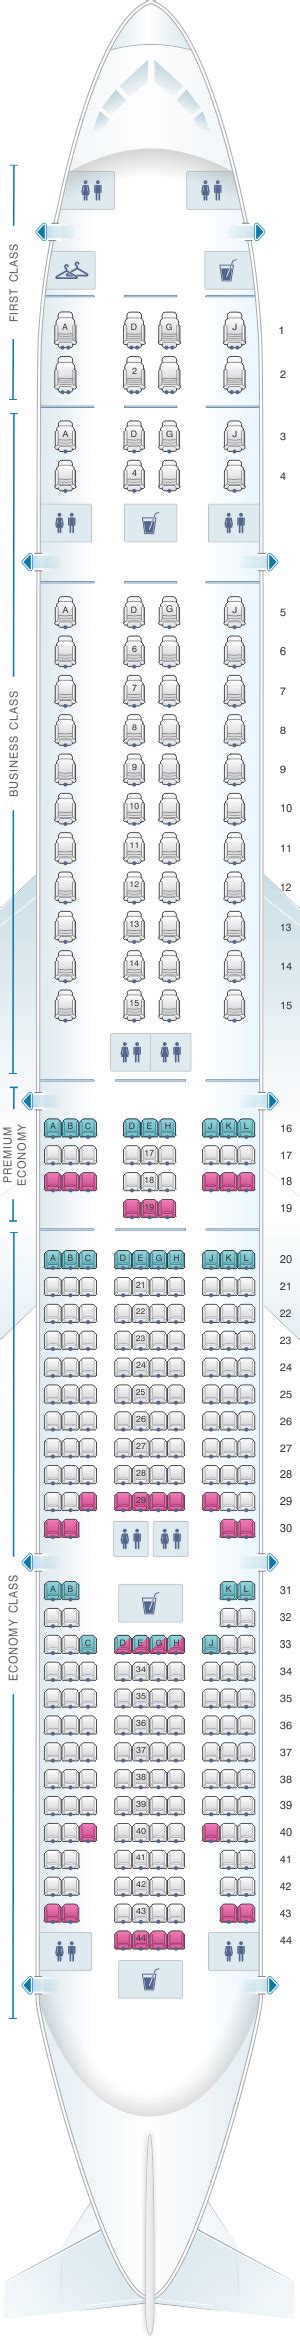 Contact information for renew-deutschland.de - 43G. this seat may have limited recline. this seat is near the galley. 44G. this seat has extra legroom. no underseat stowage. no under-seat stowage during takeoff and landing. traytable in armrest means narrower seat. 33E. 